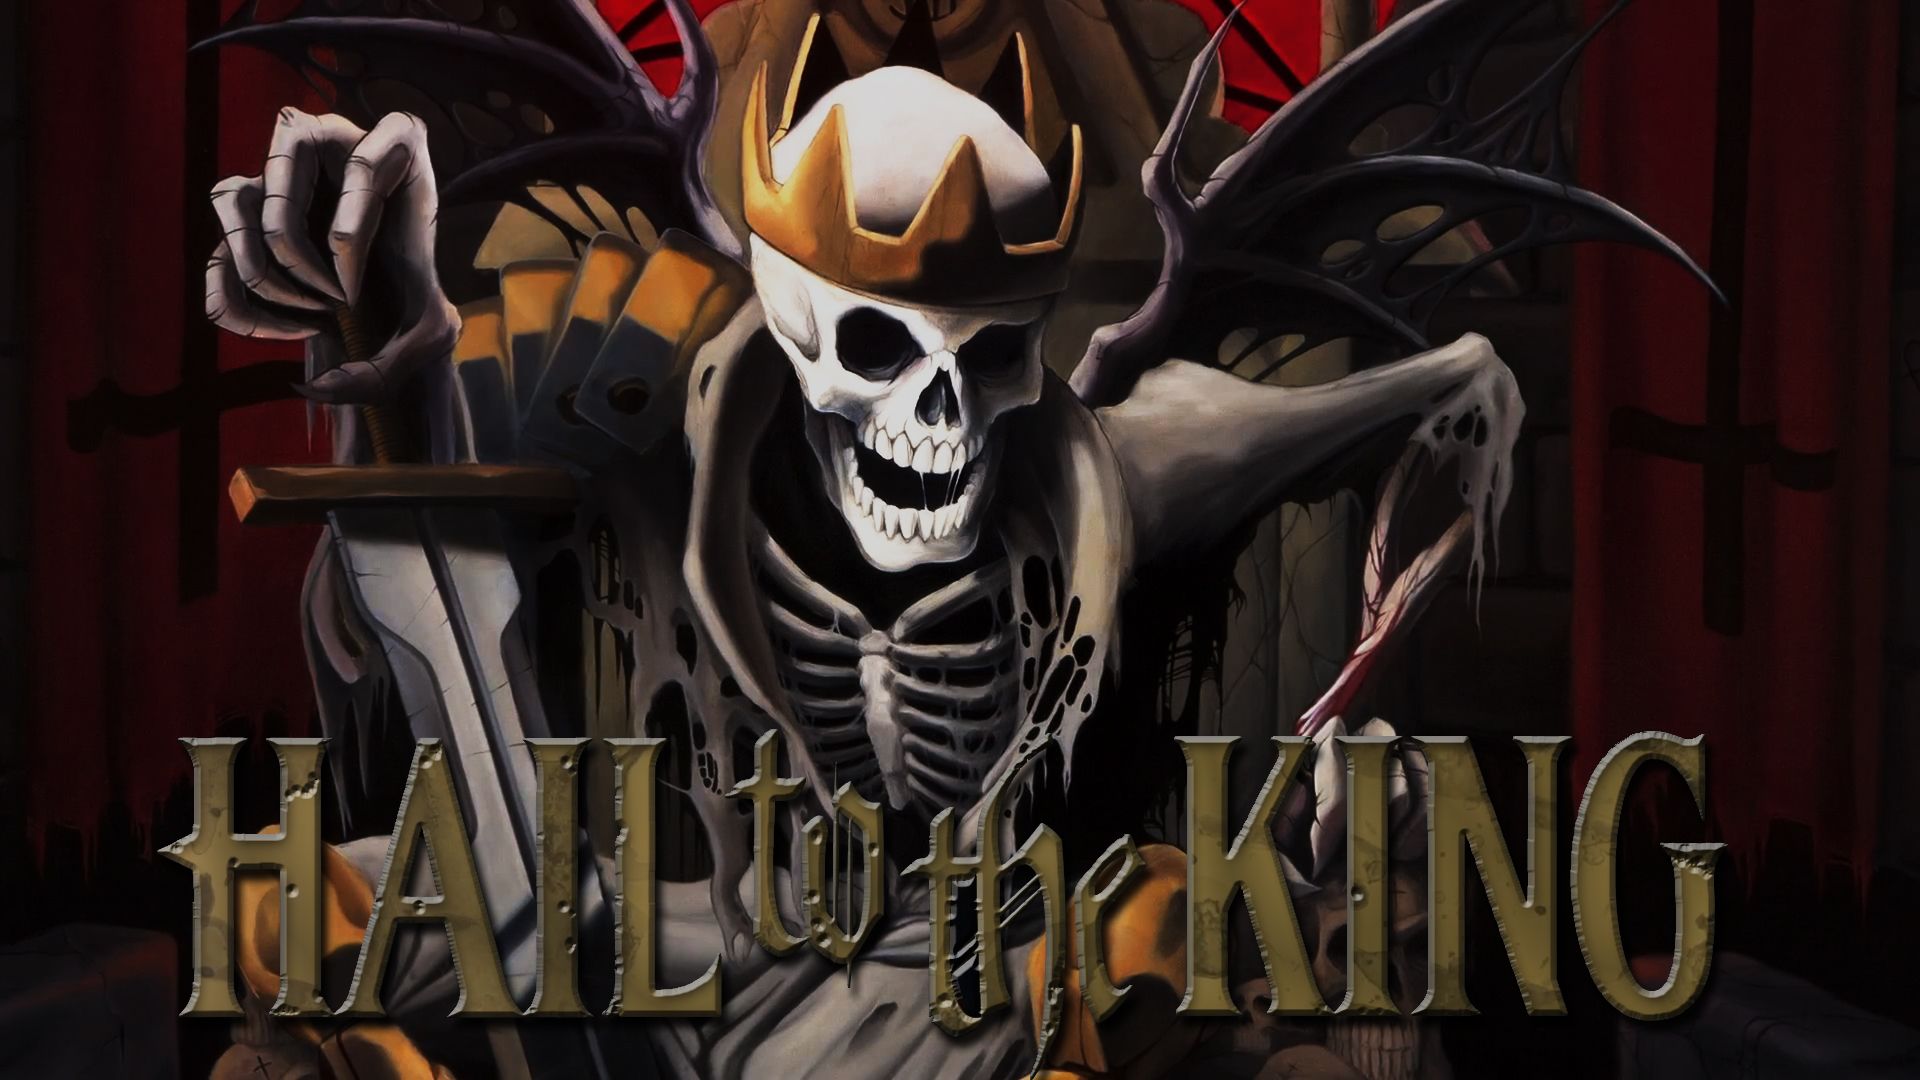 Free download Hail to the King Avenged Sevenfold wallpaper